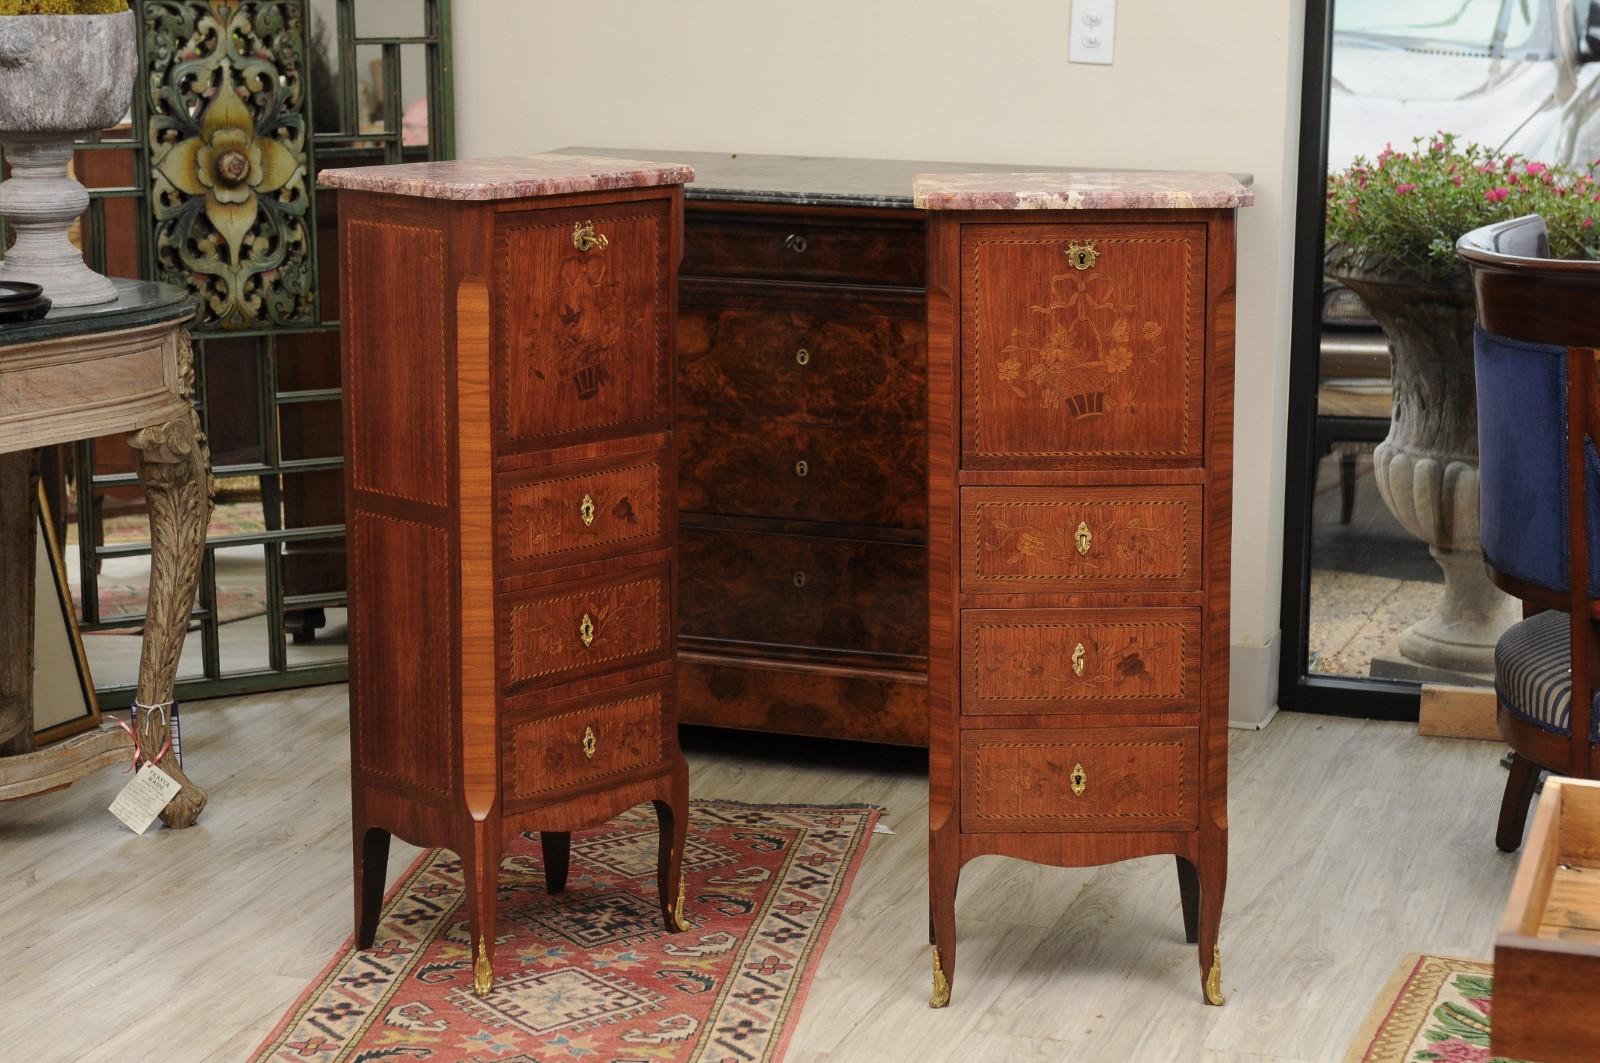 These commodes are simply beautiful !
A highly figured marble top sits on a wood case having a drop down shelf with leather.
Inside is a small drawer and storage space.
Below this are three drawers. The entire front has beautiful inlay decorated